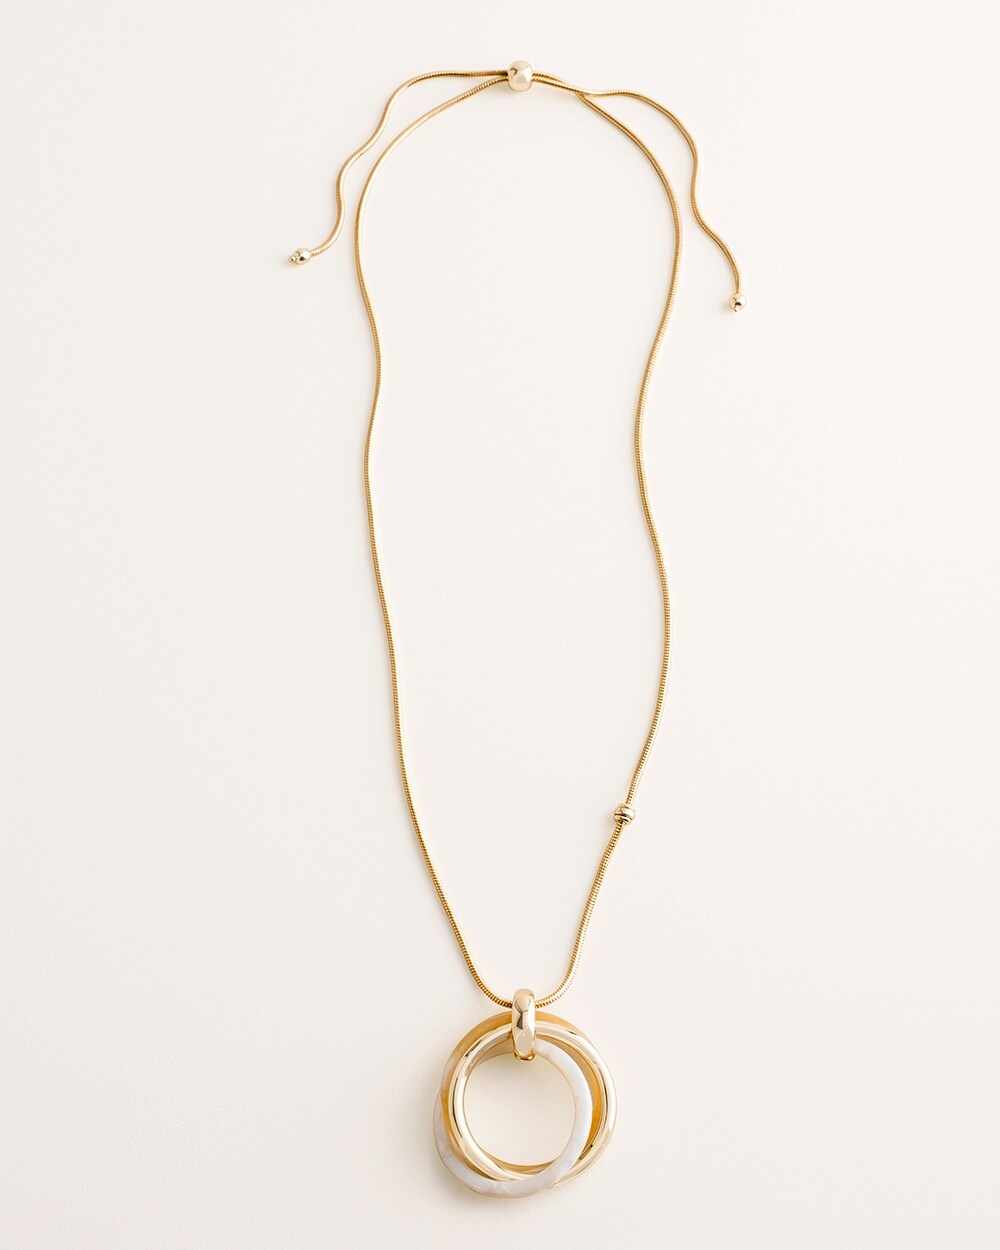 Convertible Goldtone and Neutral Circlet Pendant Necklace